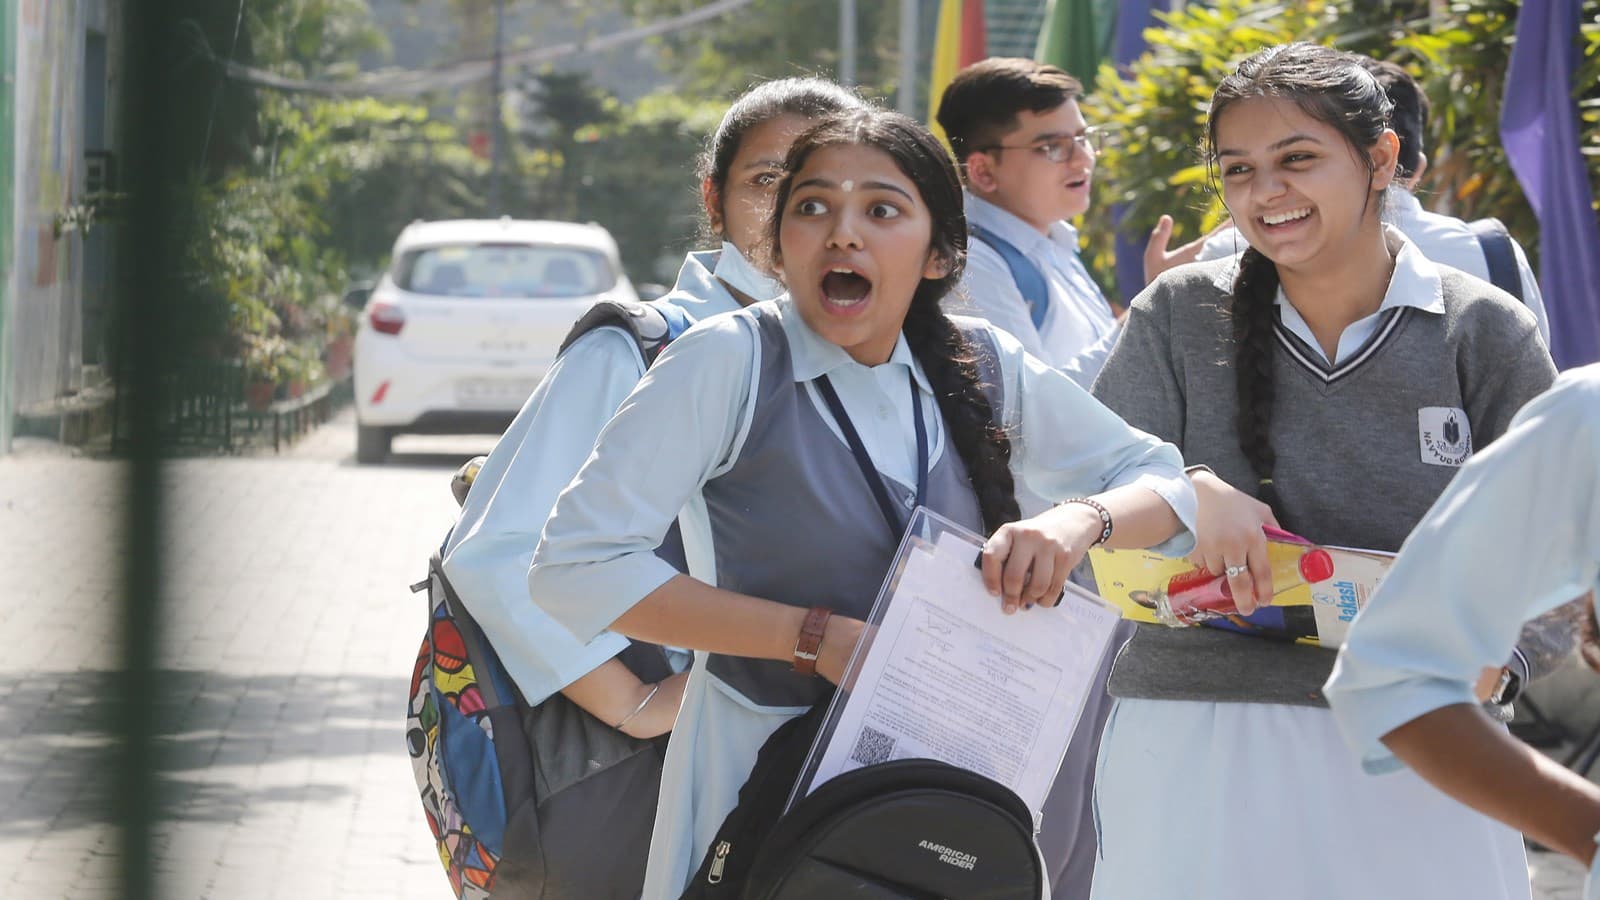 cbse results